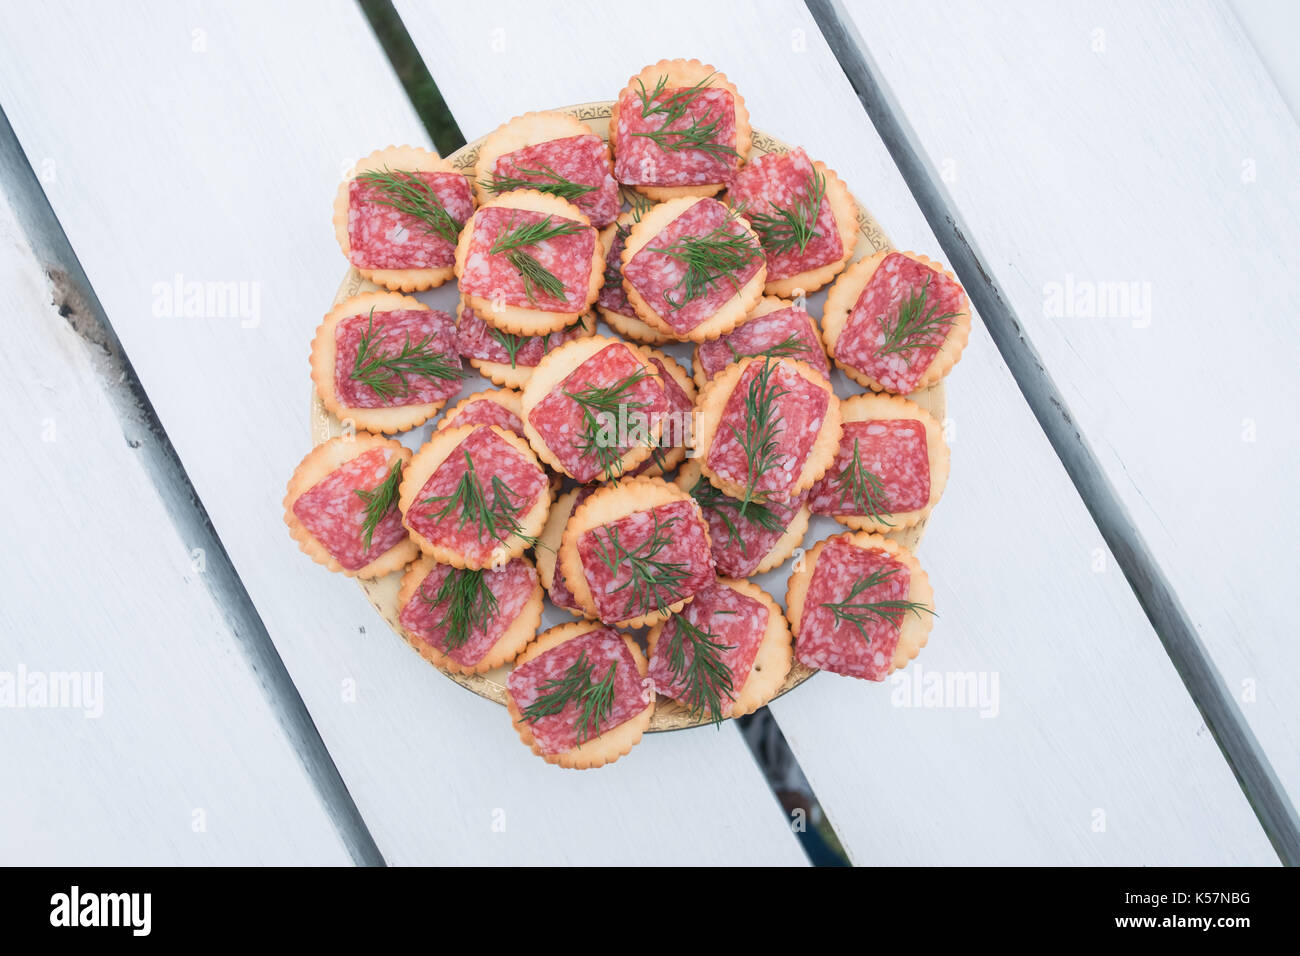 Heap of snack with salami and dill on white wood table Stock Photo